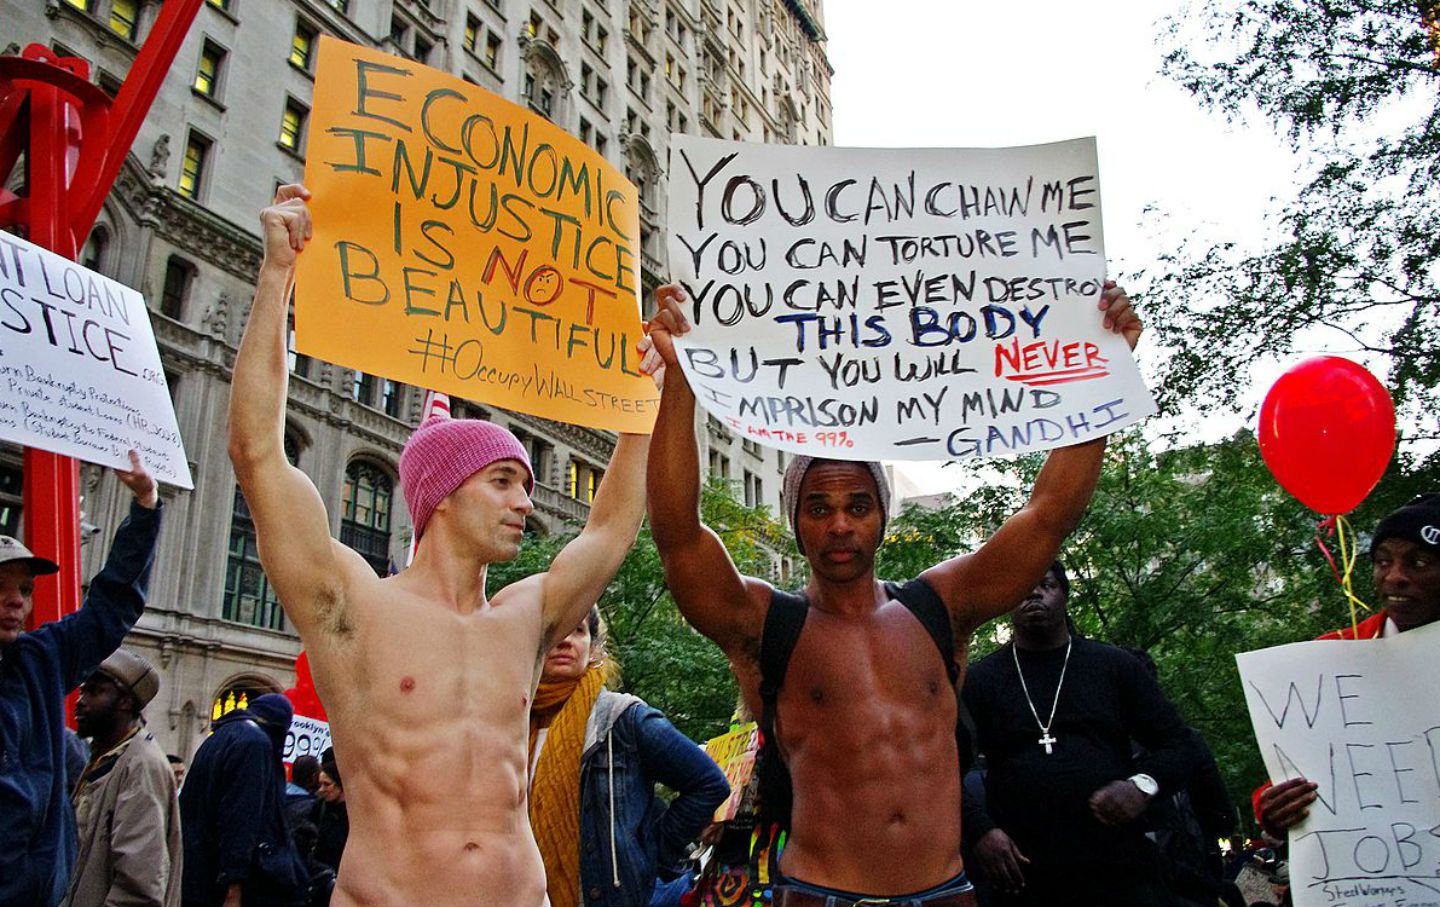 September 17, 2011: Occupy Wall Street Begins in New York City